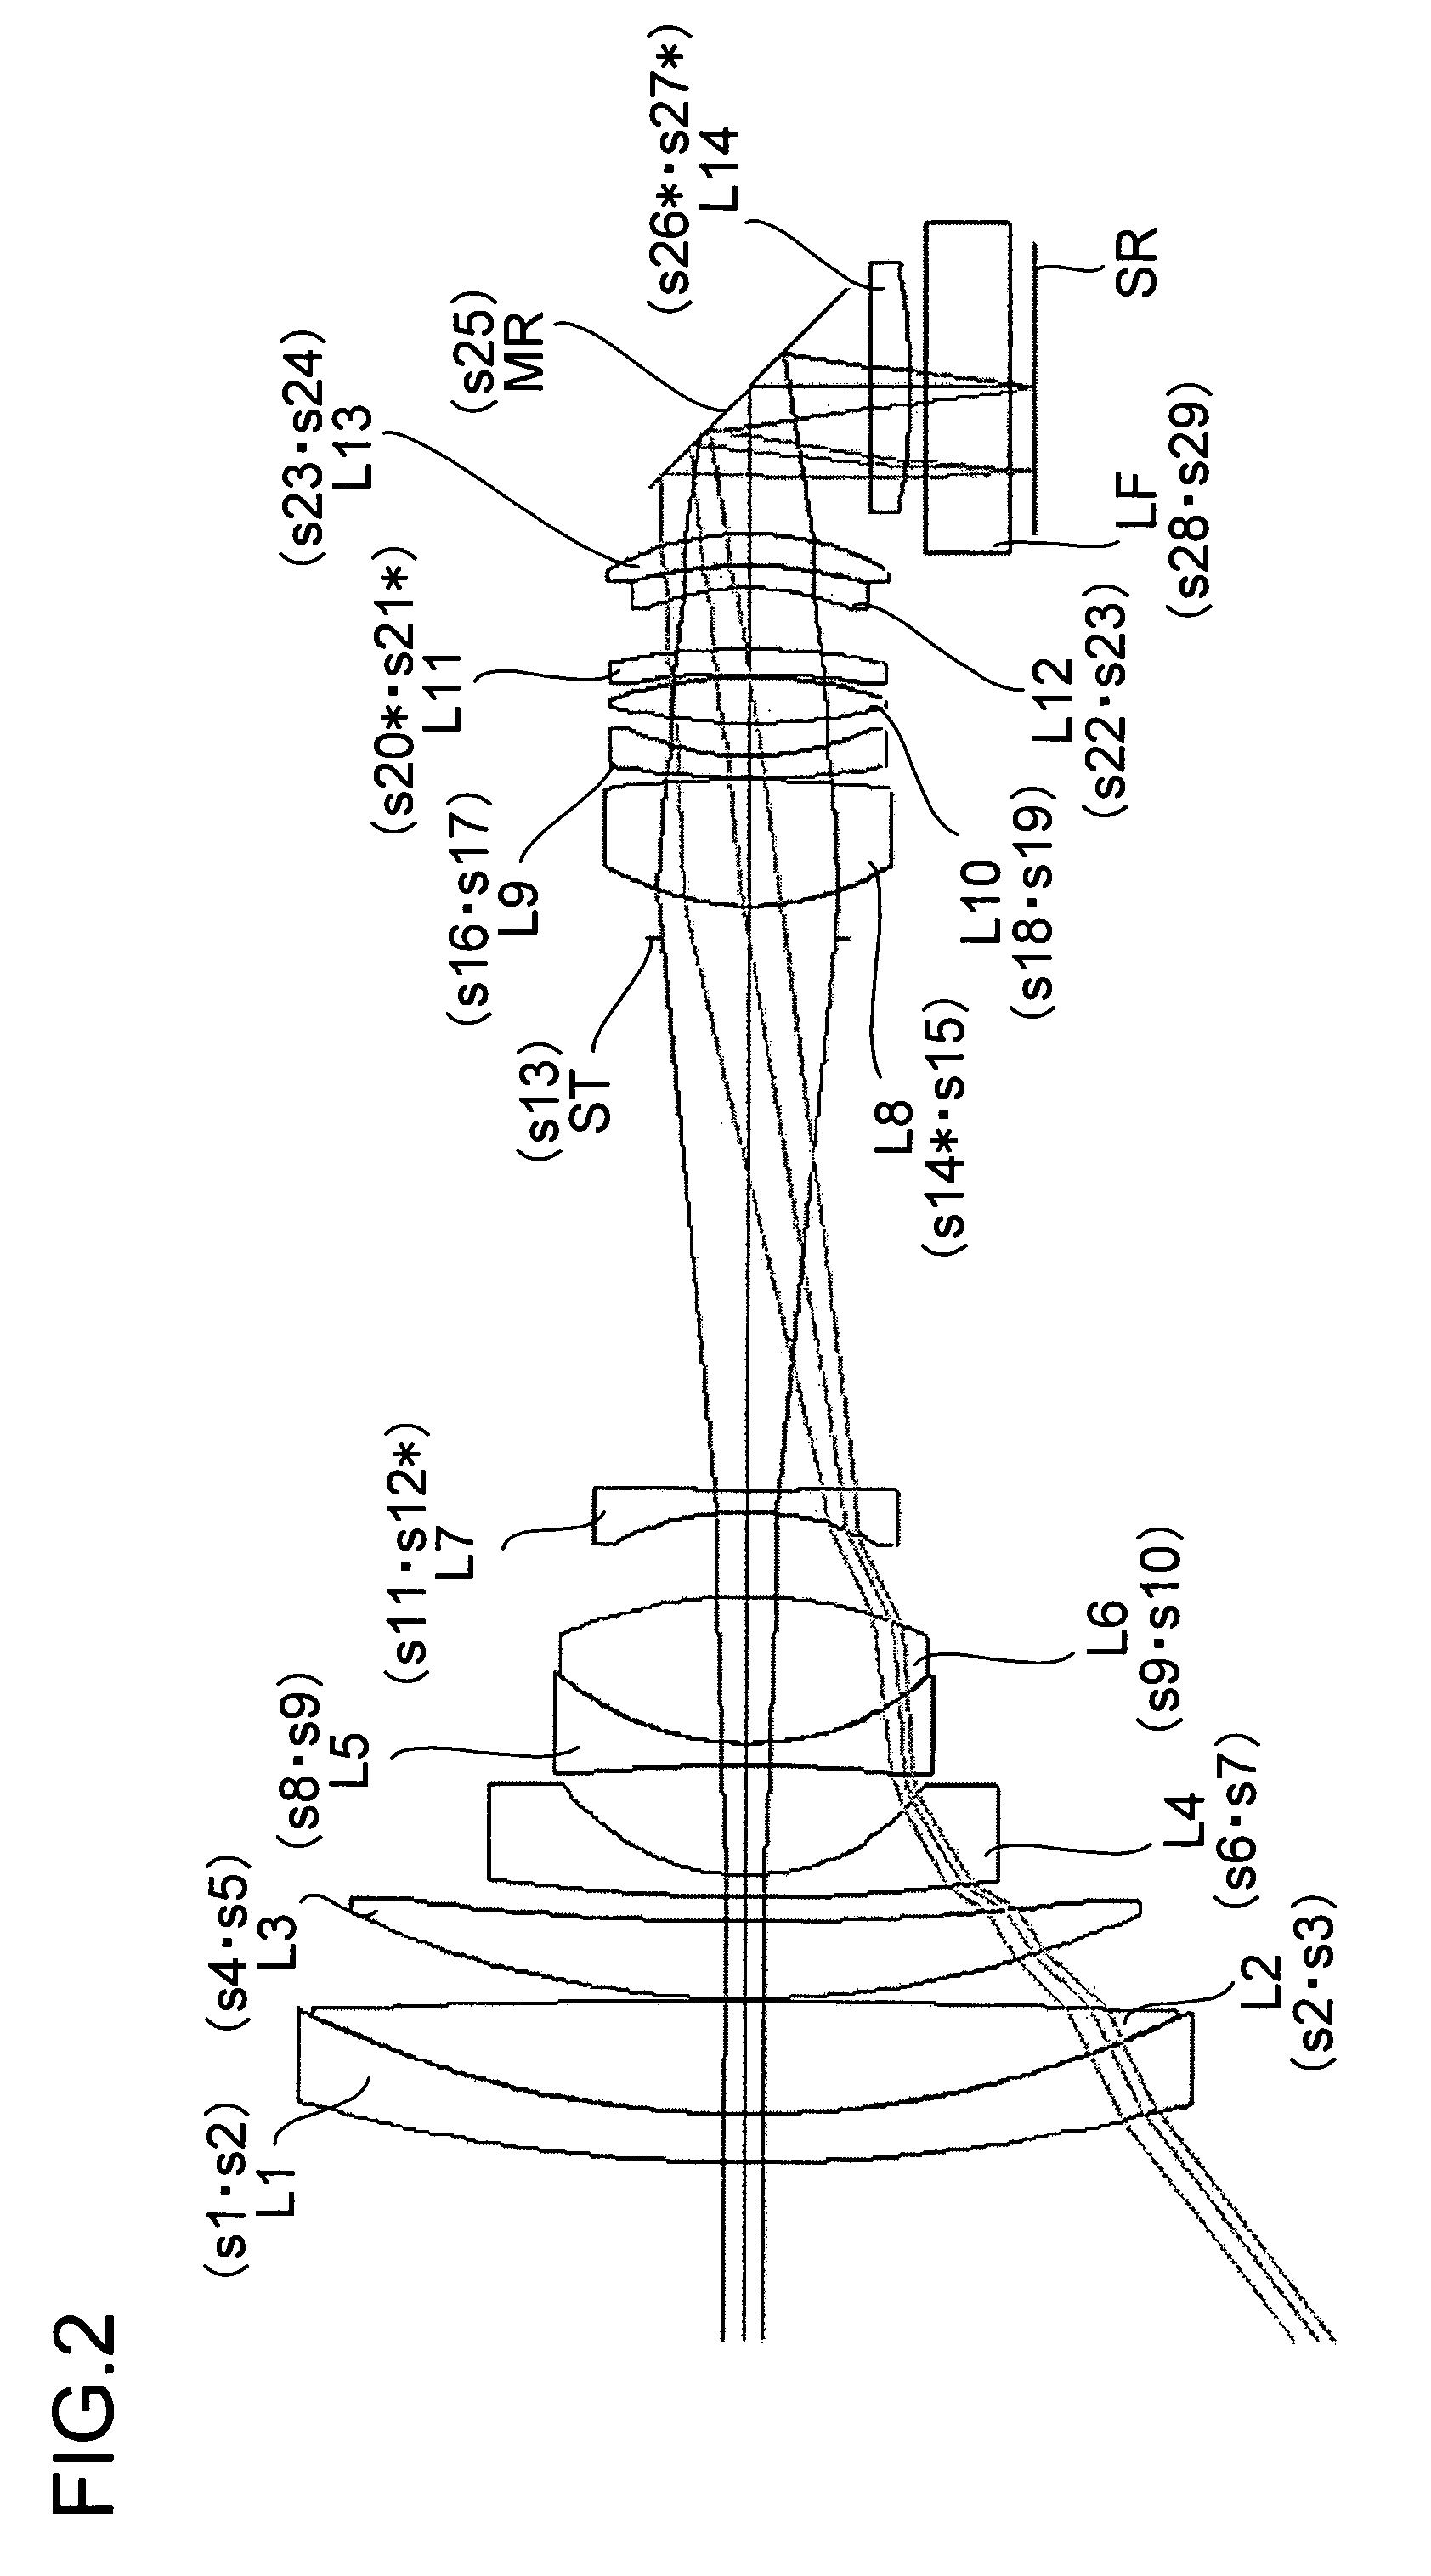 Variable-magnification optical system and image taking apparatus